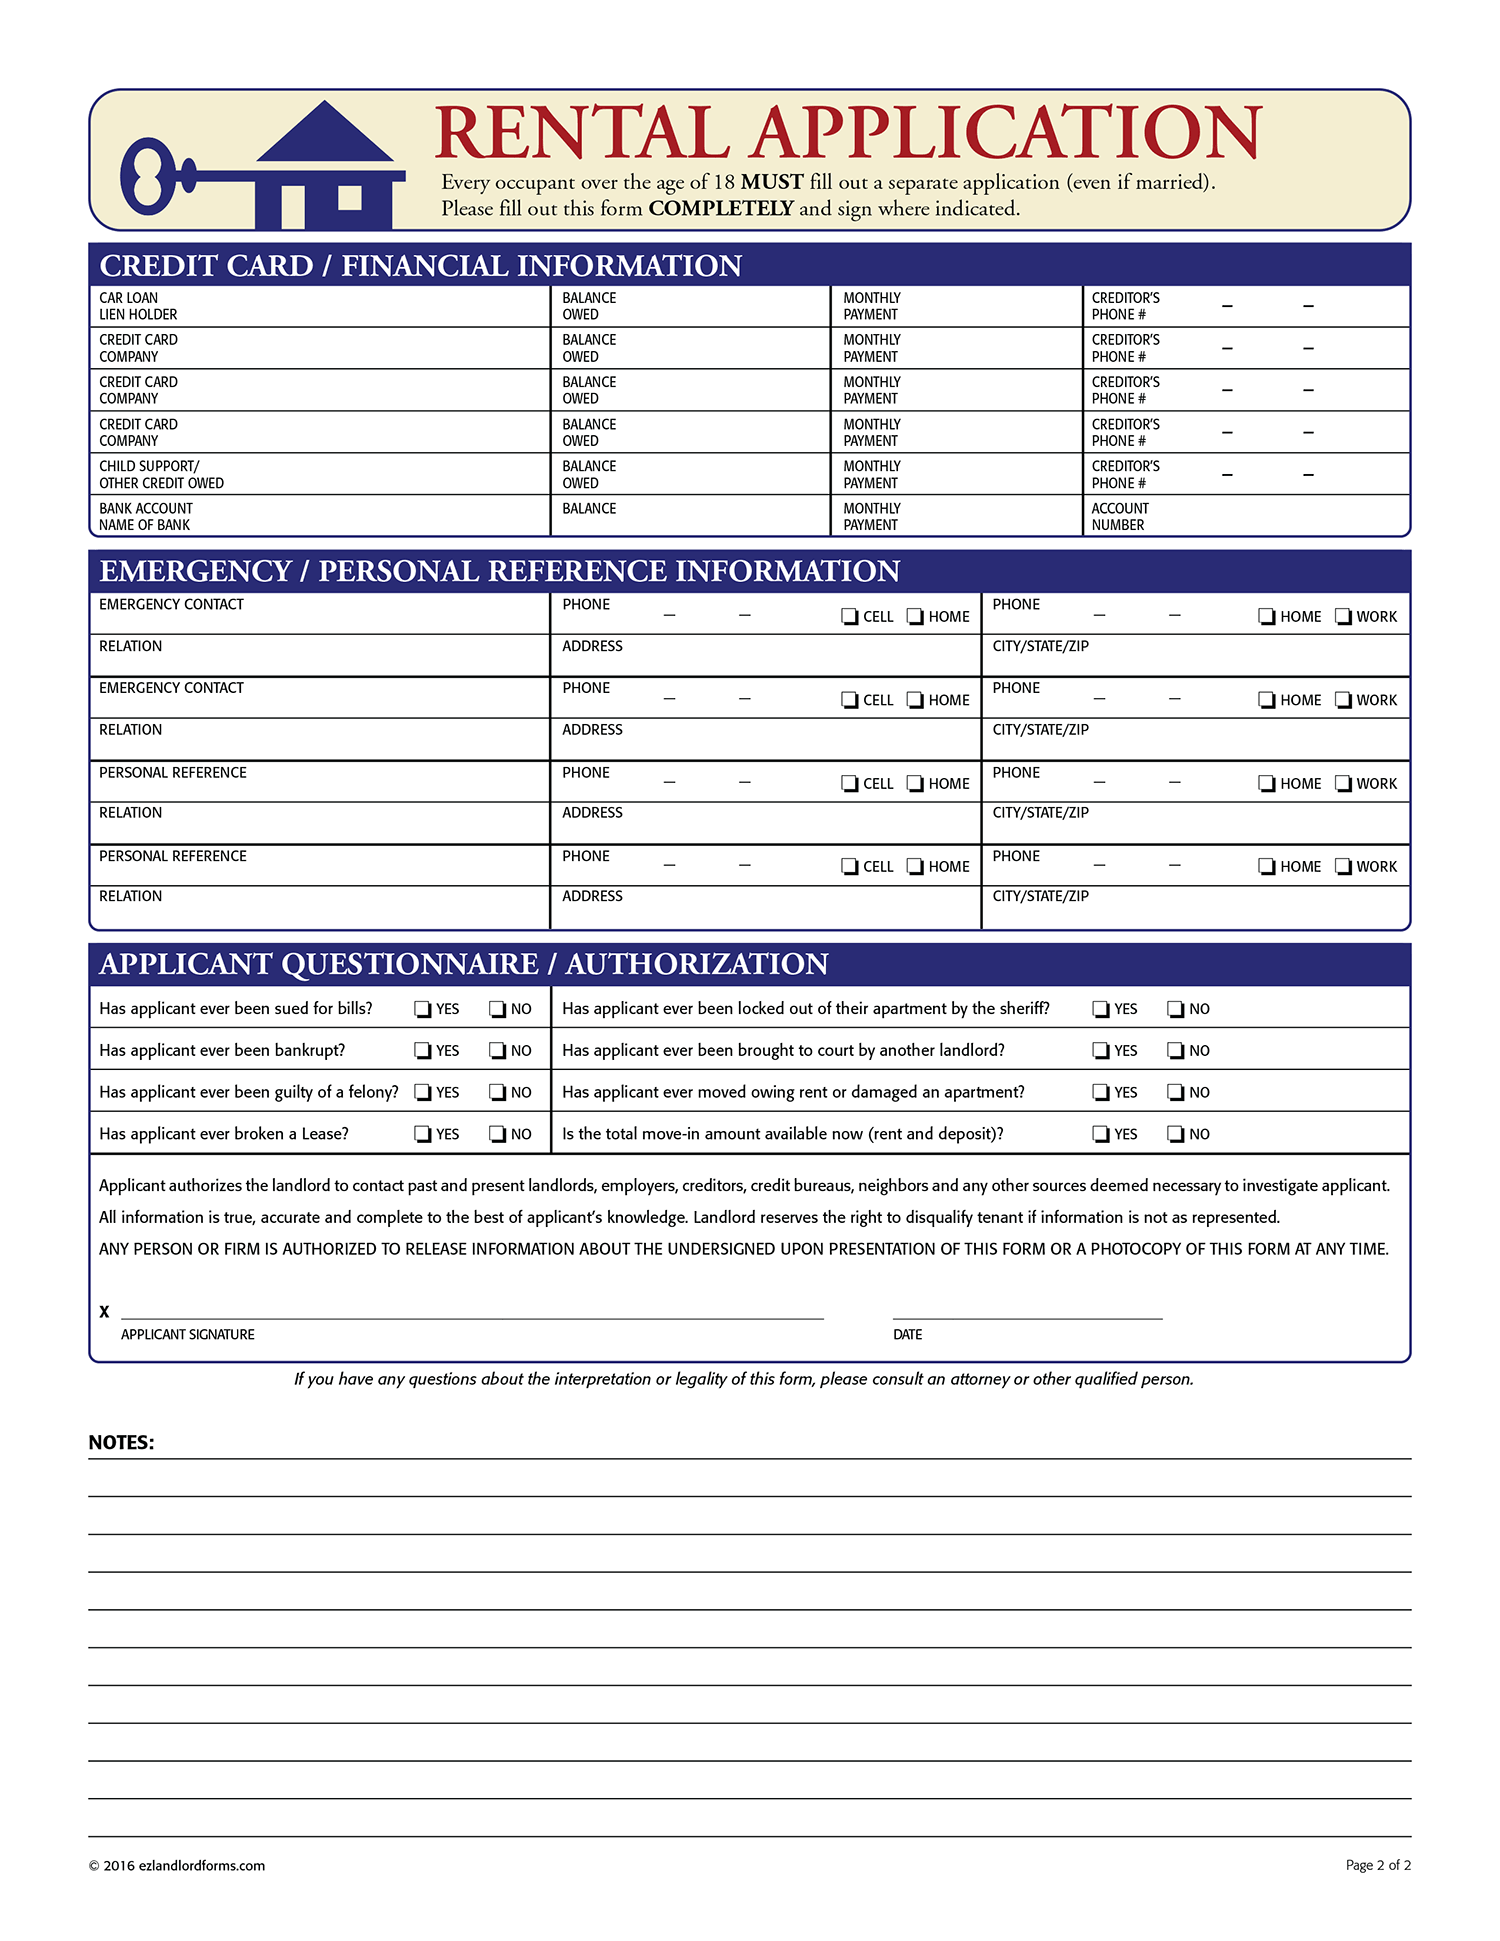 Free Rental Application Form Template from www.ezlandlordforms.com